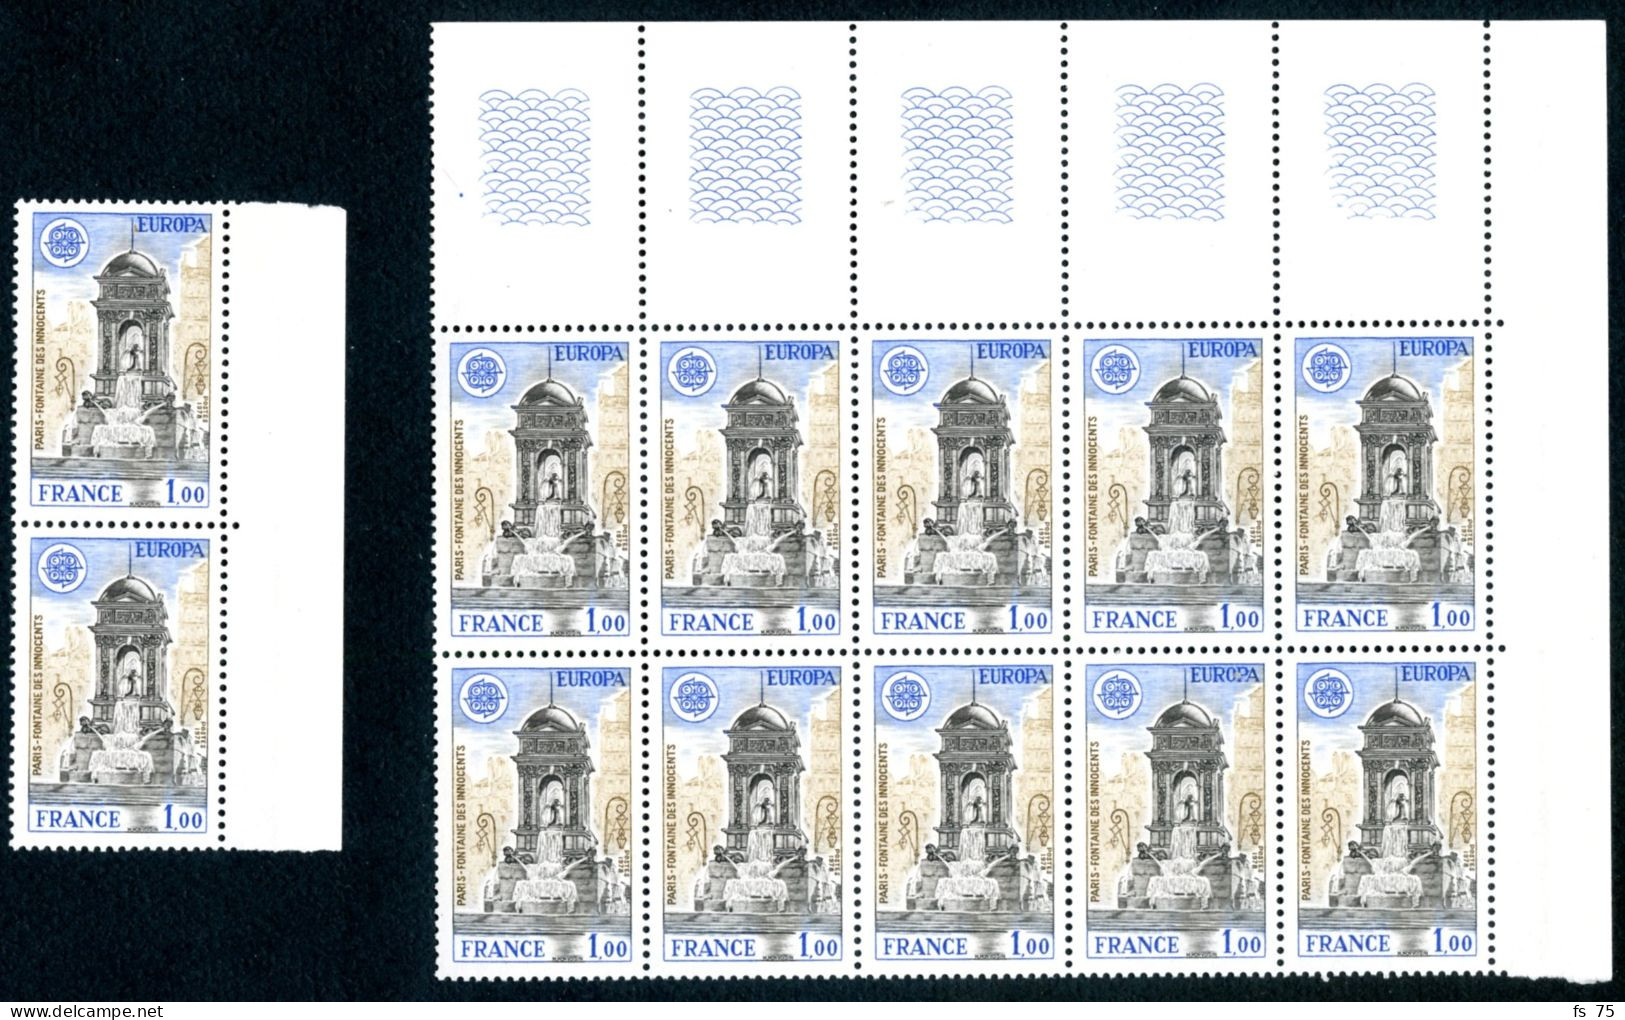 FRANCE - N°2008a 1F EUROPE FONTAINE DES INNOCENTS - GOMME TROPICALE - SANS CHARNIERE - Unused Stamps